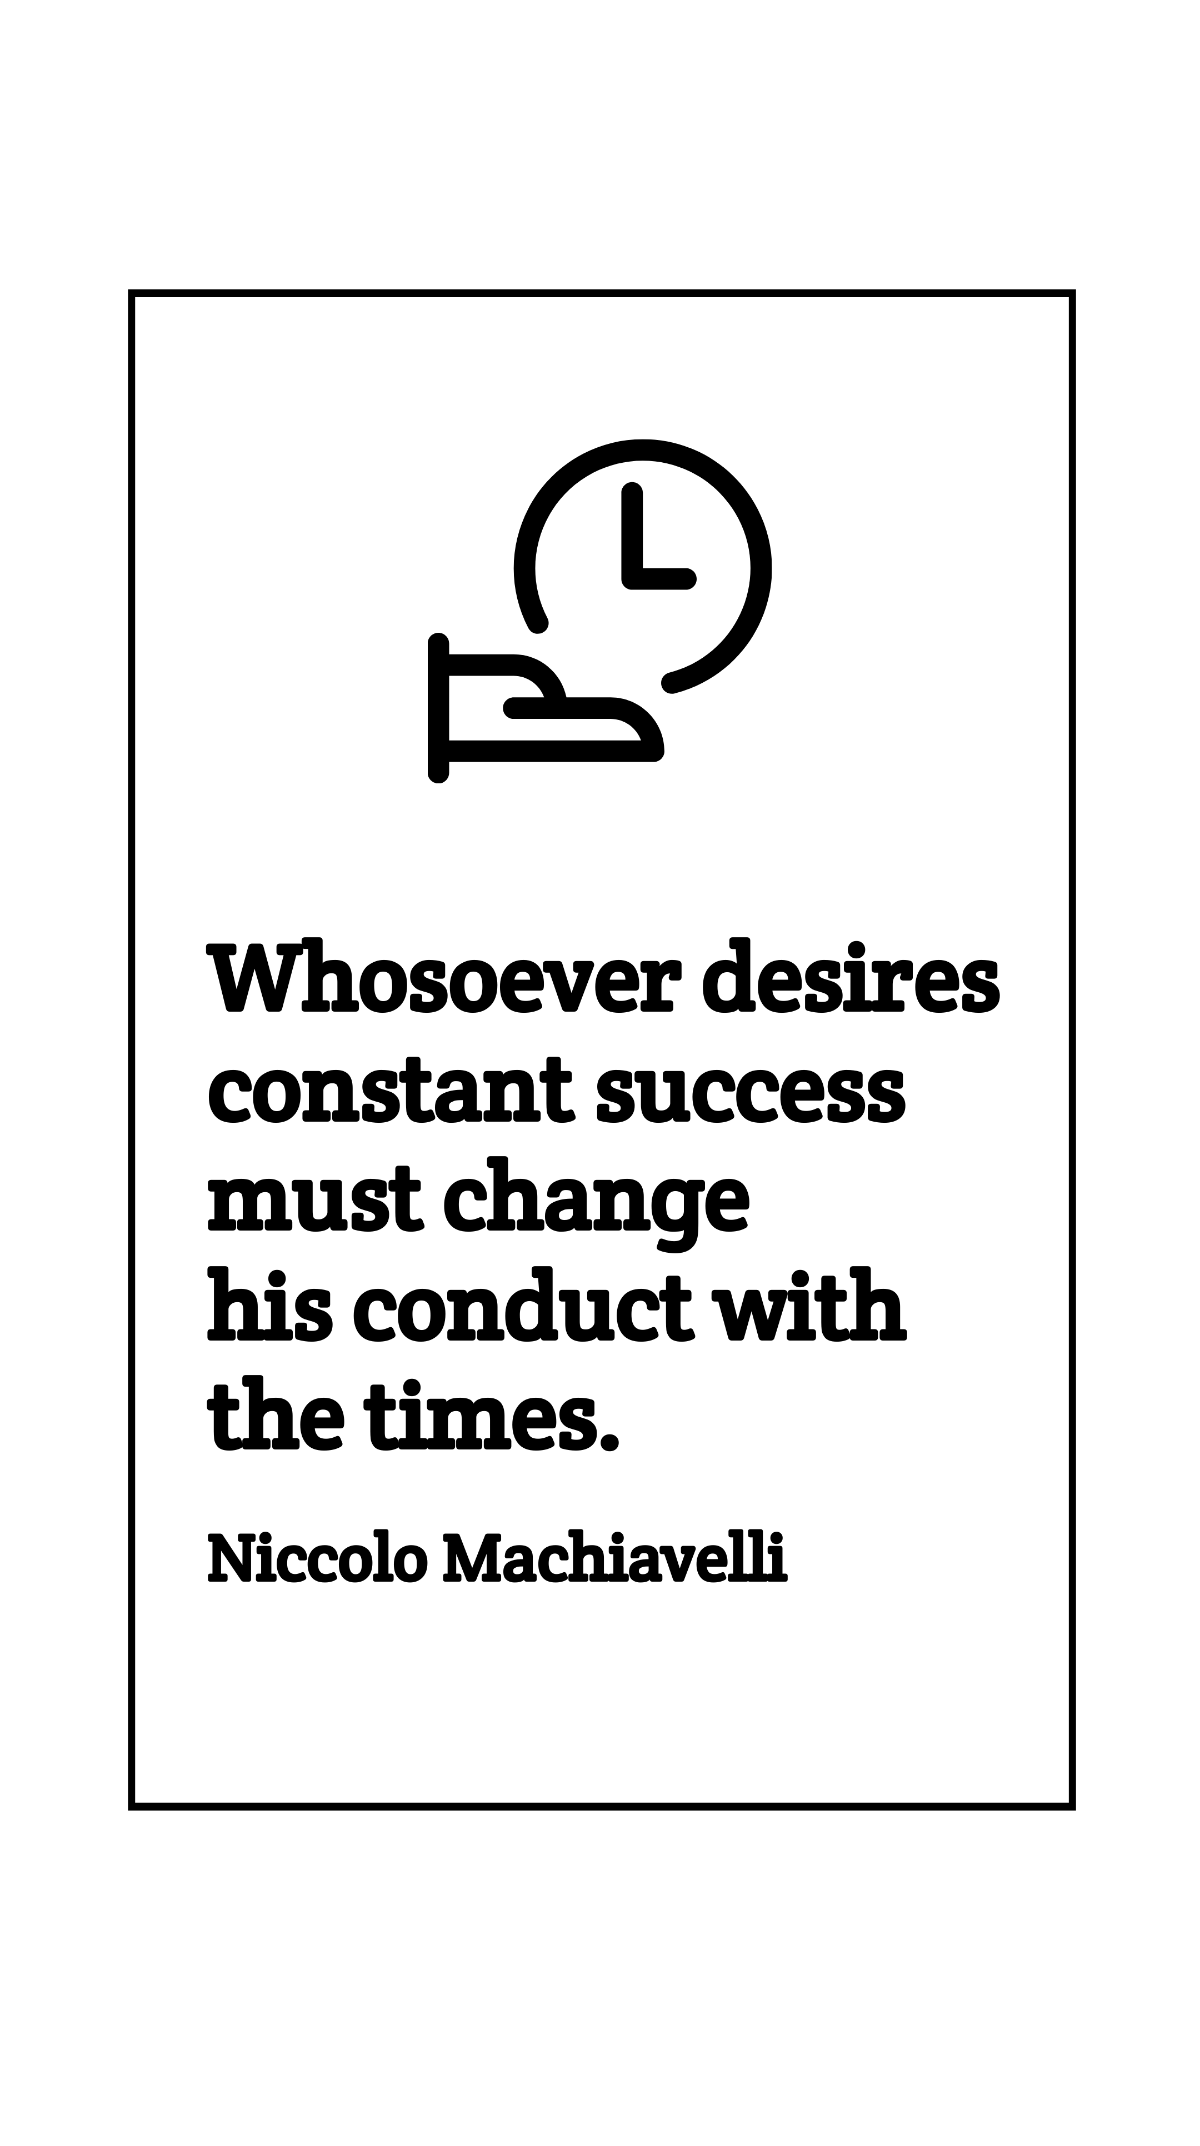 Free Niccolo Machiavelli - Whosoever desires constant success must change his conduct with the times. Template